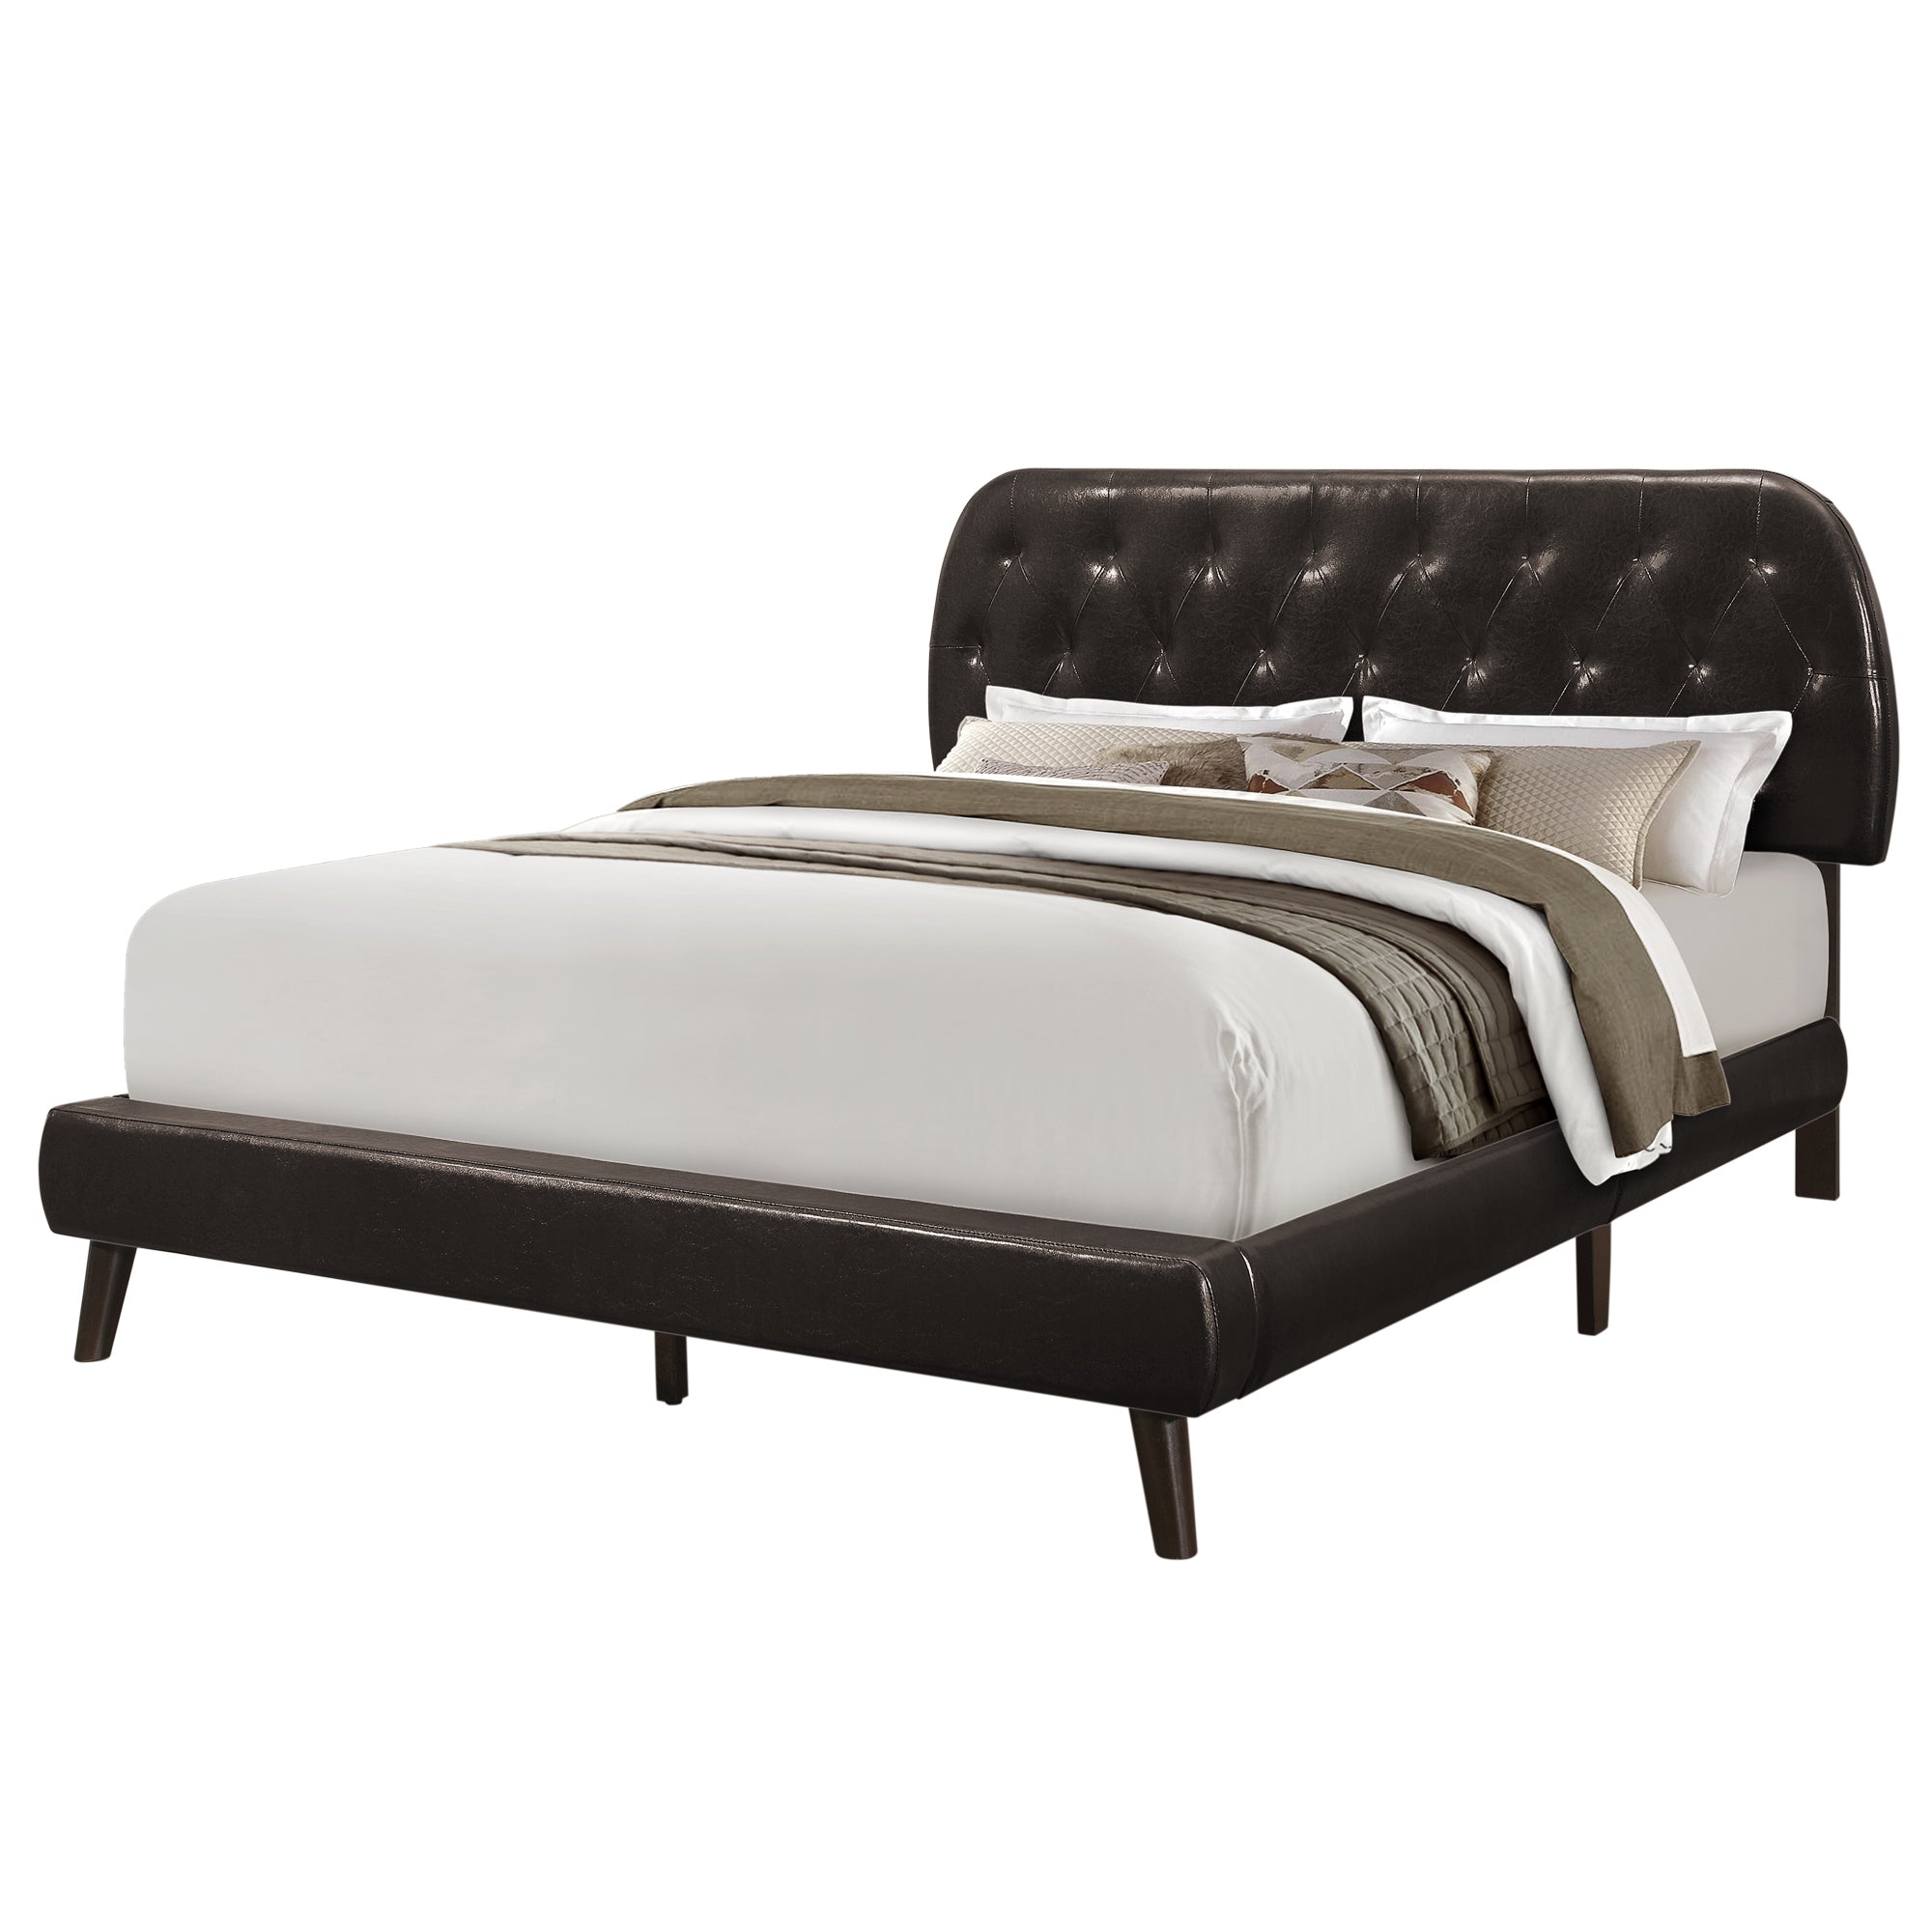 MN-255982Q    Bed, Frame, Platform, Bedroom, Queen Size, Upholstered, Leather Look, Wood Legs, Dark Brown, Black, Contemporary, Modern